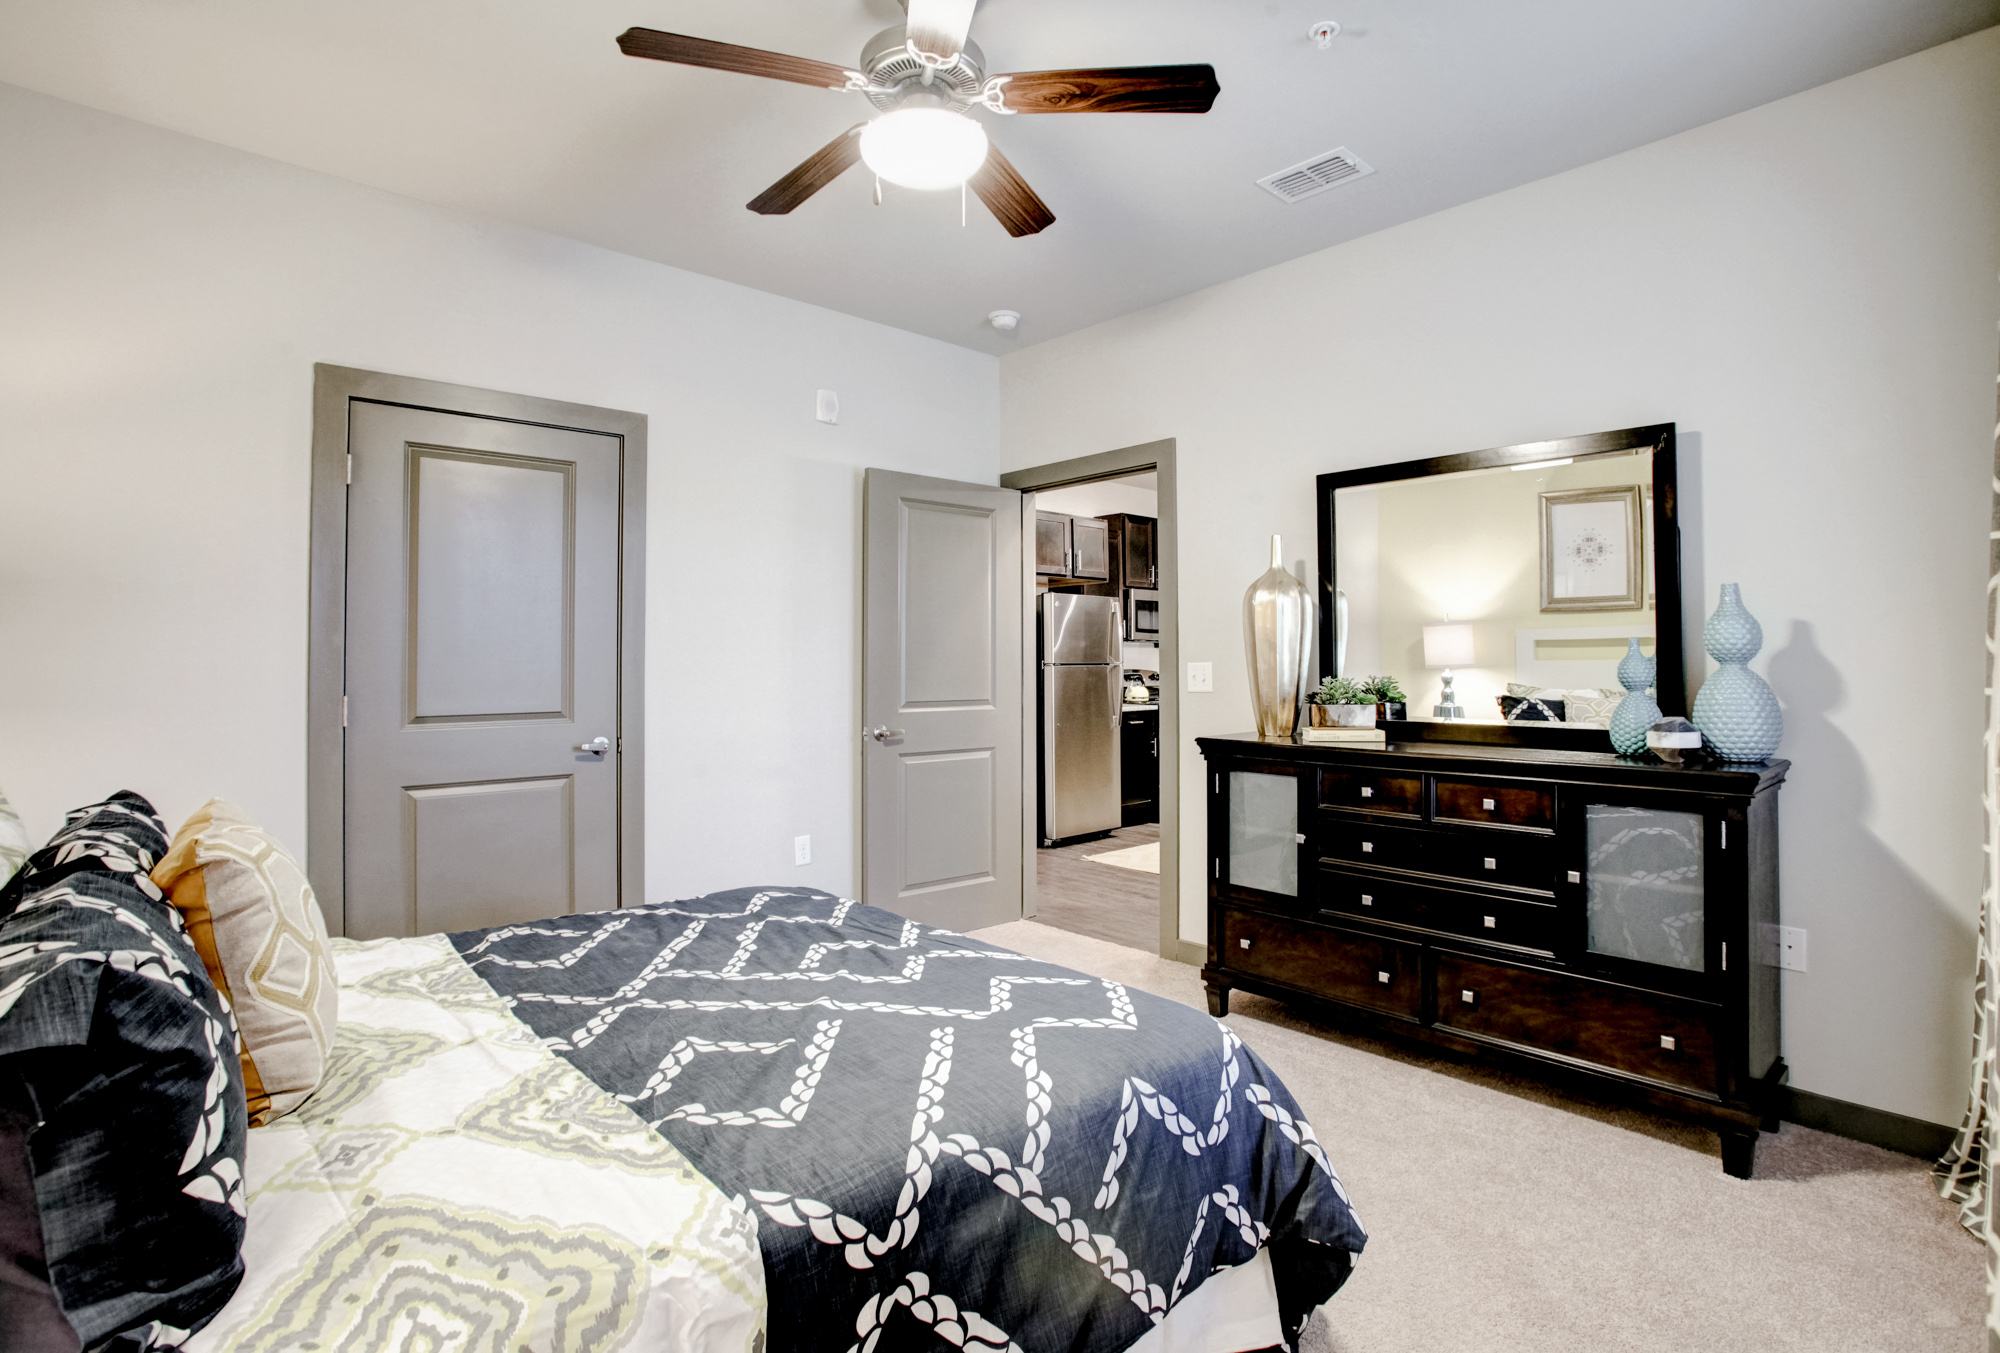 A bed and dresser are in the bedroom at Park 9 apartments in Woodstock, GA.